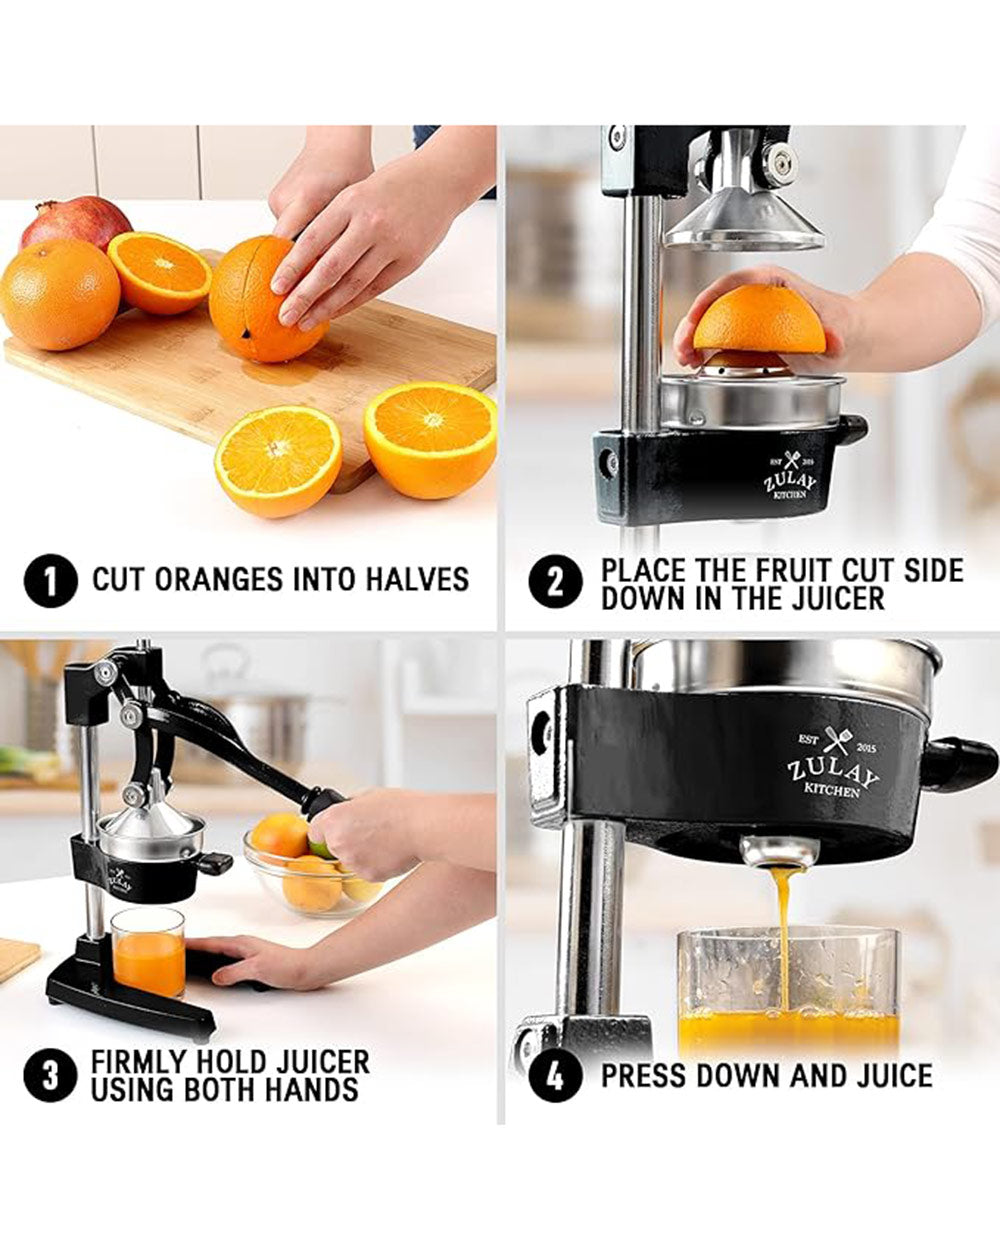 Zulay Professional Citrus Juicer And Lemon Squeezer